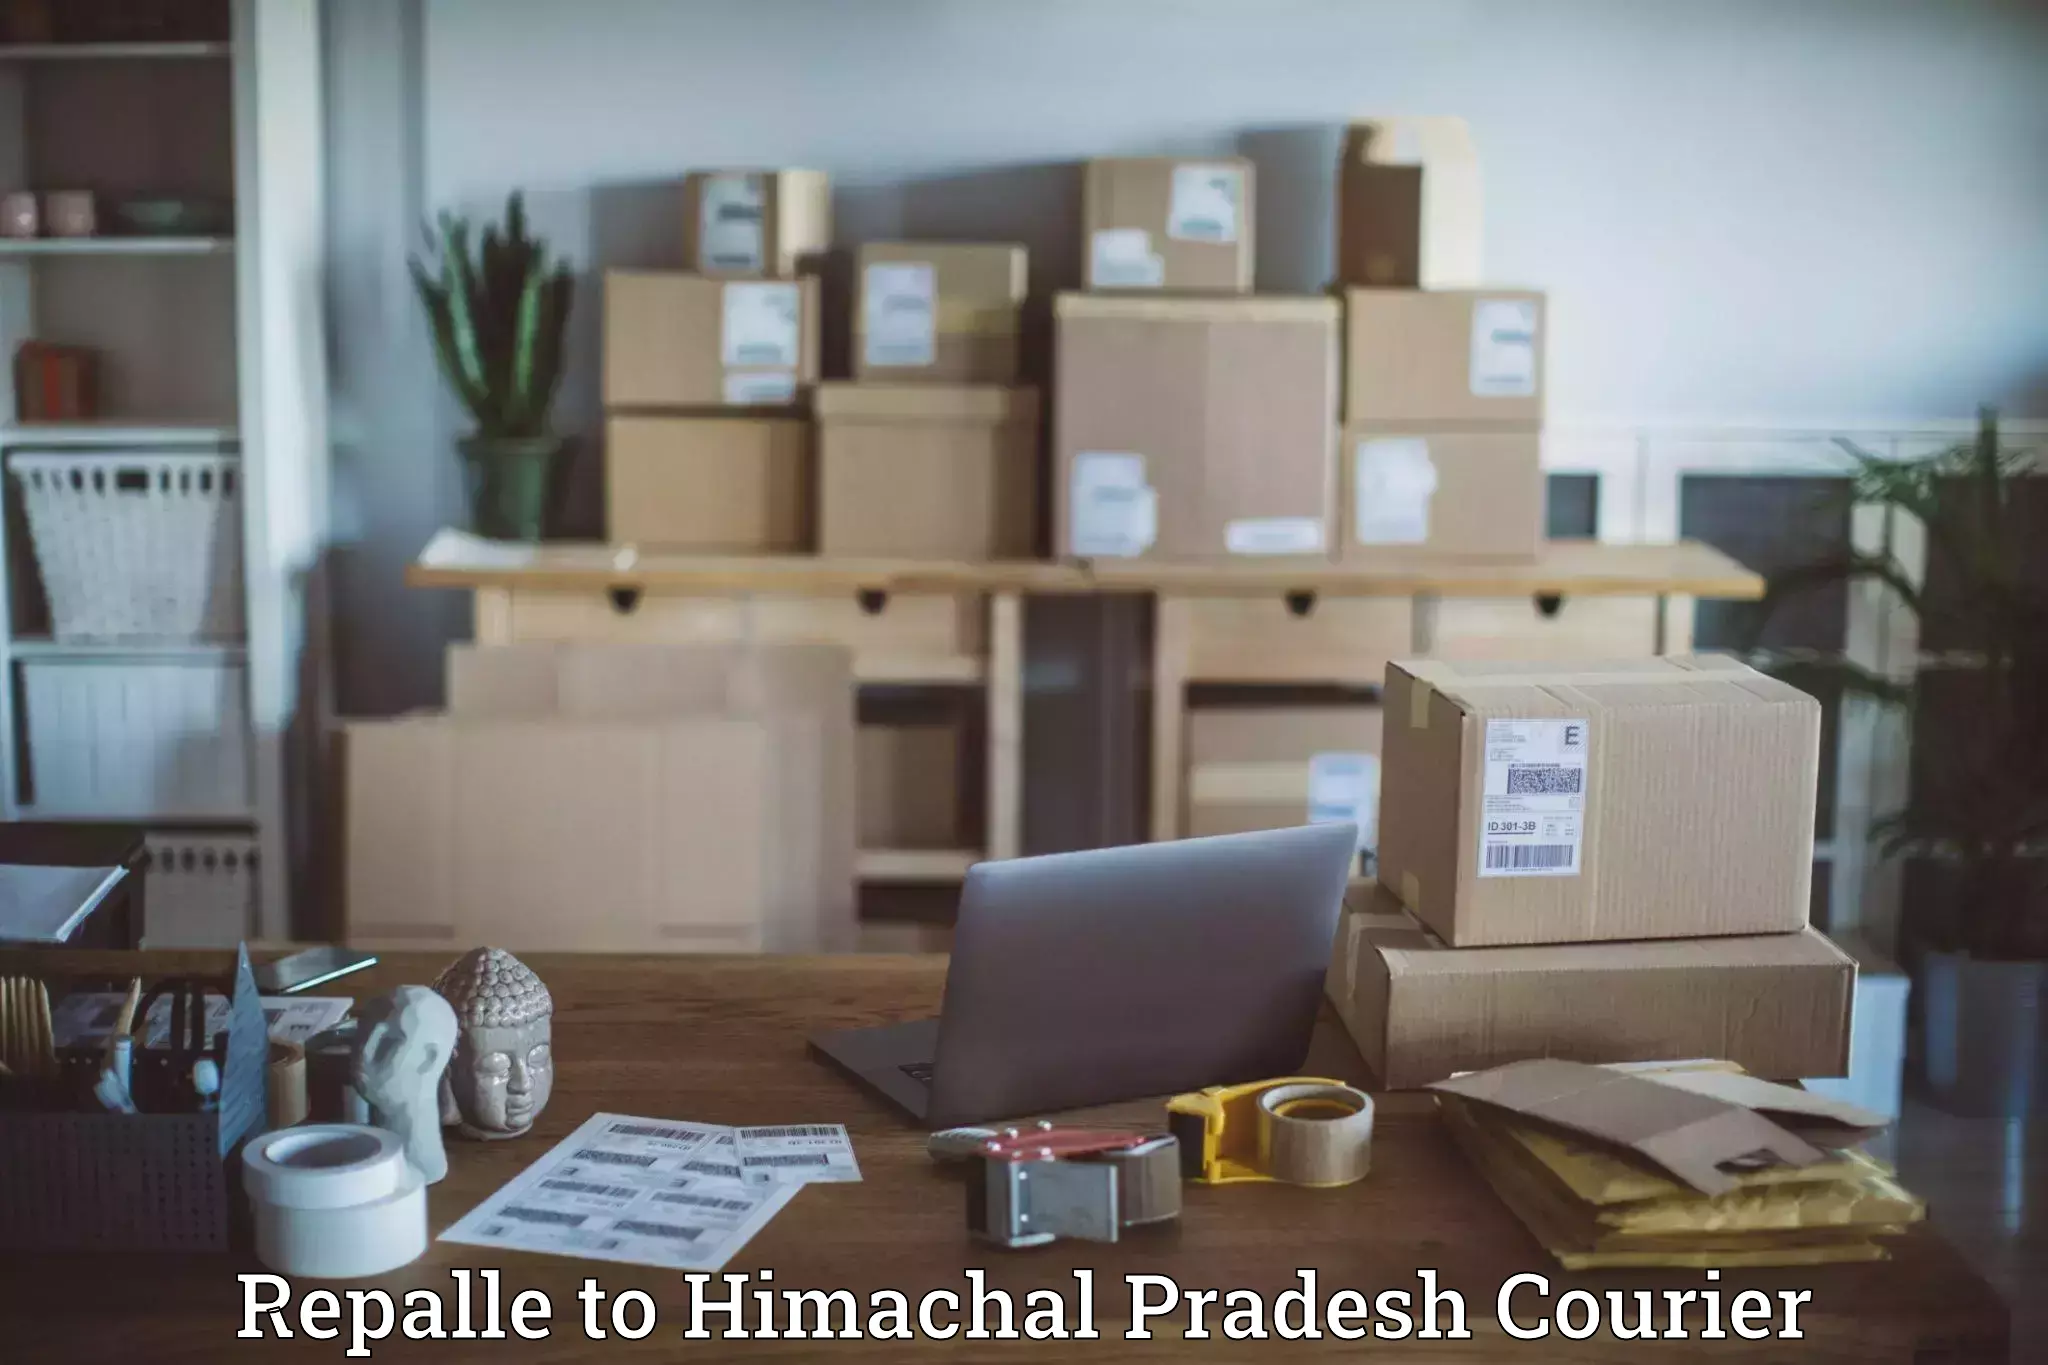 High-quality delivery services Repalle to Bilaspur Himachal Pradesh